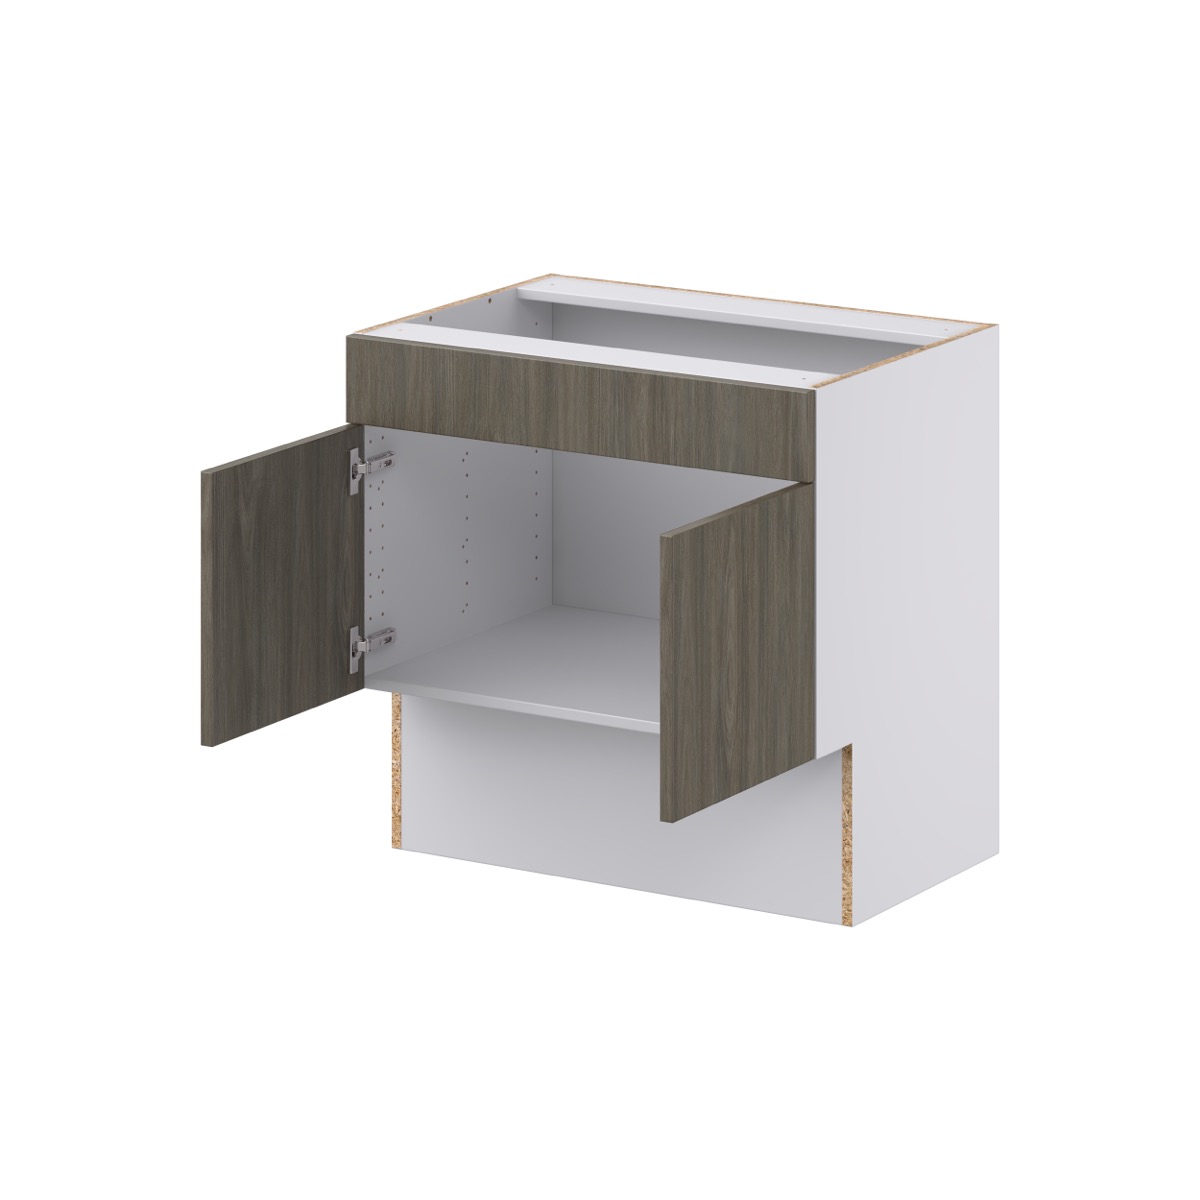 Medora Base Cabinet 30 .in W x 30 .in H x 21 .in D - J Collection